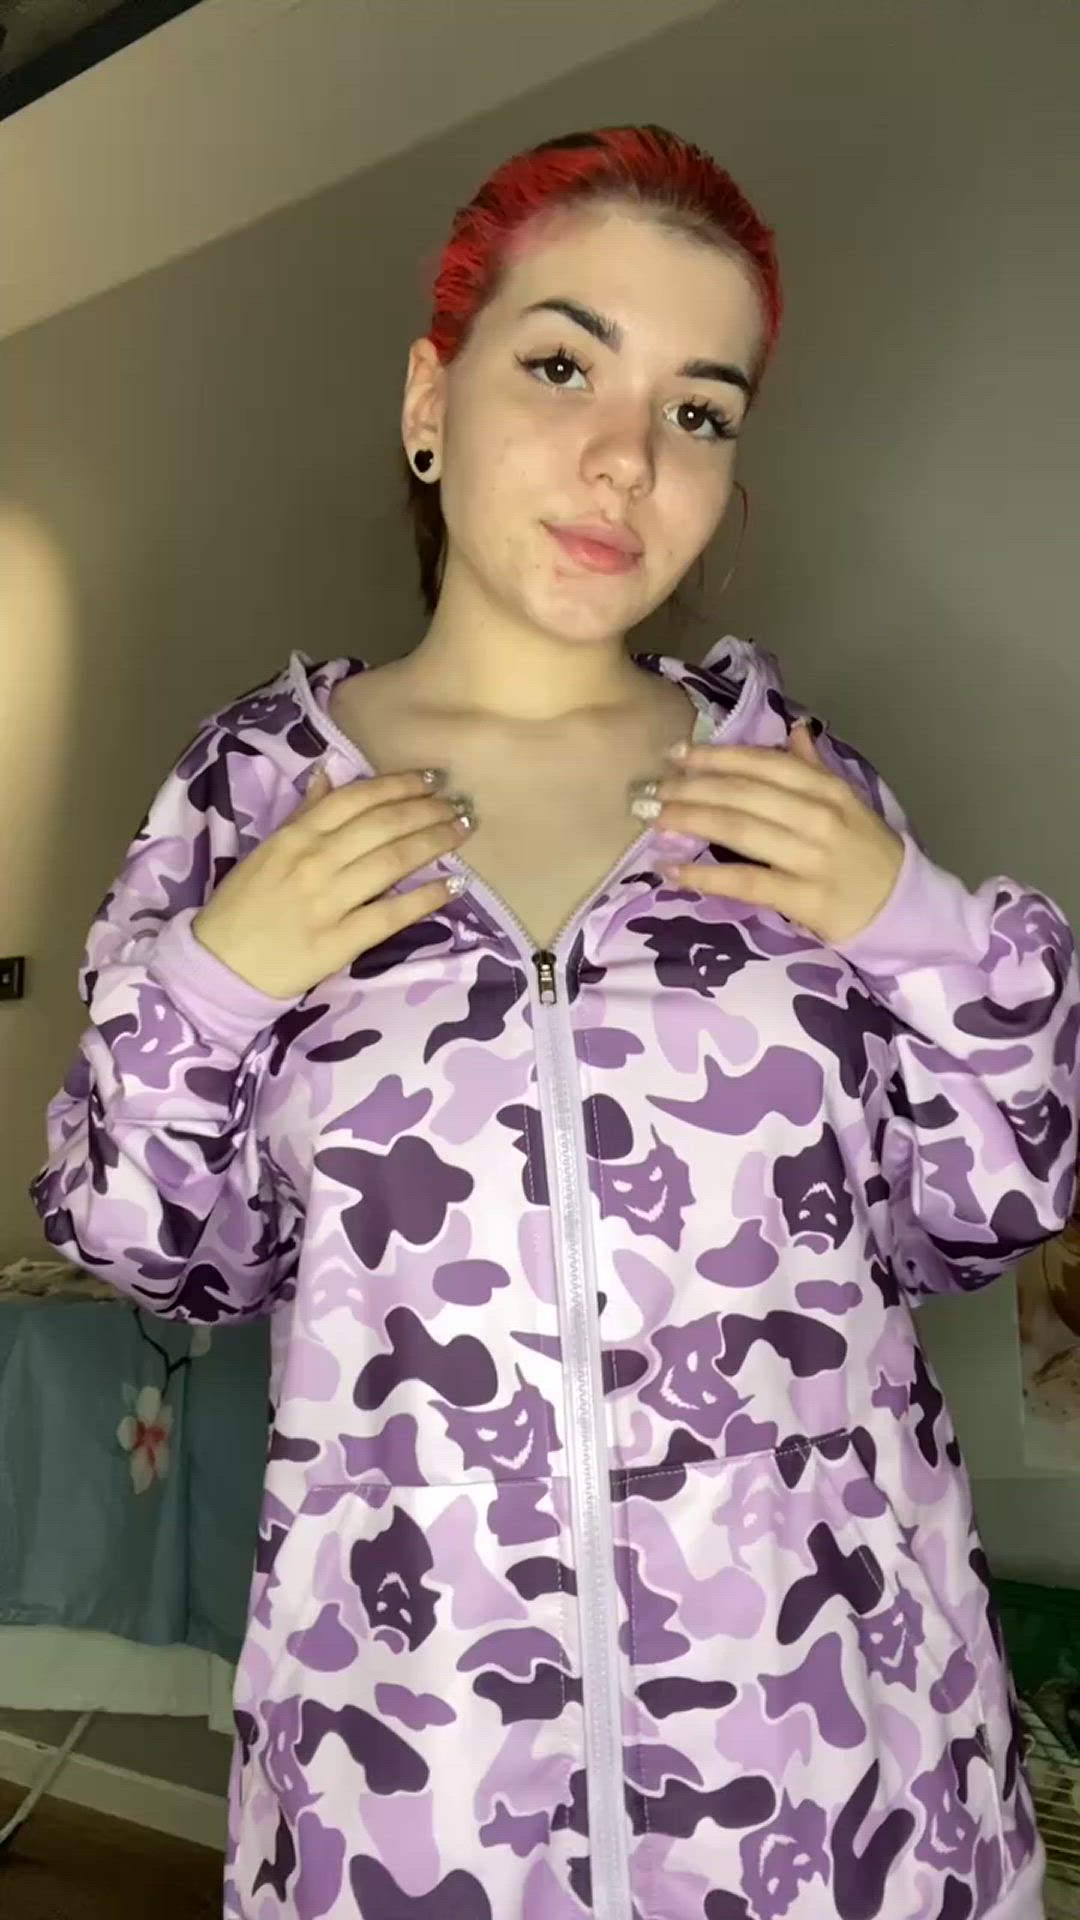 Tits porn video with onlyfans model victoriayourgf <strong>@victoriayourgf</strong>